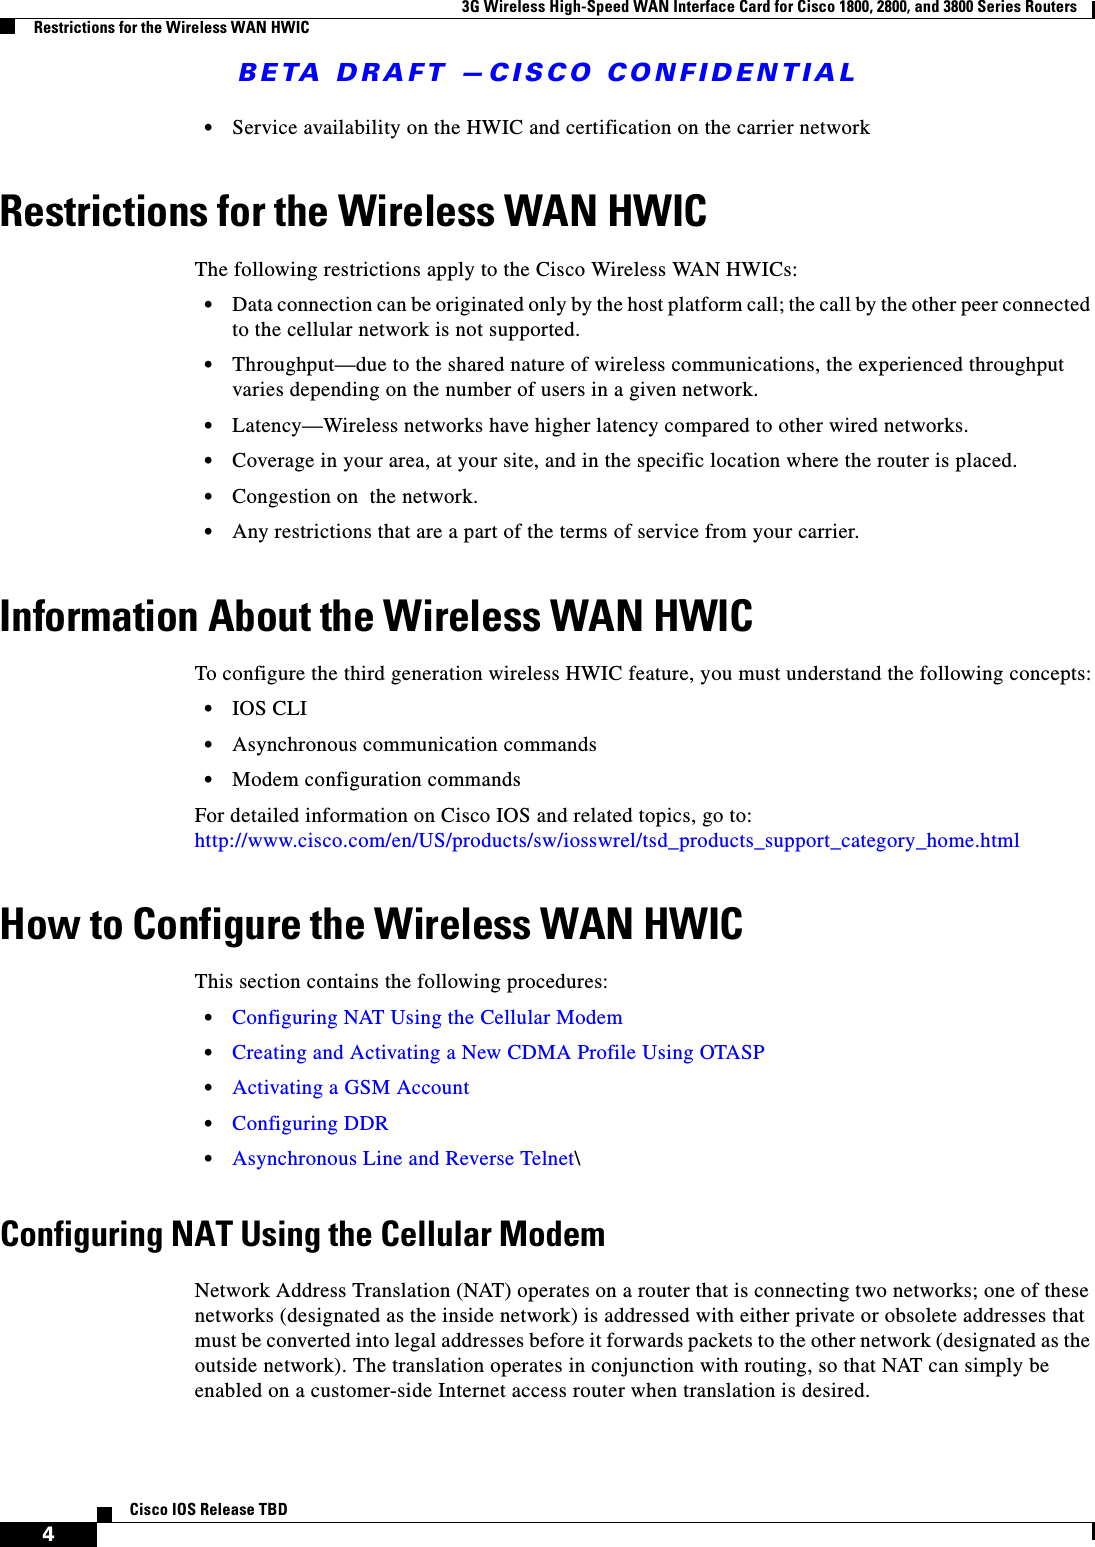 BETA DRAFT —CISCO CONFIDENTIAL3G Wireless High-Speed WAN Interface Card for Cisco 1800, 2800, and 3800 Series RoutersRestrictions for the Wireless WAN HWIC4Cisco IOS Release TBD•Service availability on the HWIC and certification on the carrier networkRestrictions for the Wireless WAN HWICThe following restrictions apply to the Cisco Wireless WAN HWICs:•Data connection can be originated only by the host platform call; the call by the other peer connected to the cellular network is not supported.•Throughput—due to the shared nature of wireless communications, the experienced throughput varies depending on the number of users in a given network. •Latency—Wireless networks have higher latency compared to other wired networks.•Coverage in your area, at your site, and in the specific location where the router is placed. •Congestion on  the network.•Any restrictions that are a part of the terms of service from your carrier.Information About the Wireless WAN HWICTo configure the third generation wireless HWIC feature, you must understand the following concepts:•IOS CLI•Asynchronous communication commands•Modem configuration commandsFor detailed information on Cisco IOS and related topics, go to: http://www.cisco.com/en/US/products/sw/iosswrel/tsd_products_support_category_home.htmlHow to Configure the Wireless WAN HWICThis section contains the following procedures:•Configuring NAT Using the Cellular Modem•Creating and Activating a New CDMA Profile Using OTASP•Activating a GSM Account•Configuring DDR•Asynchronous Line and Reverse Telnet\Configuring NAT Using the Cellular ModemNetwork Address Translation (NAT) operates on a router that is connecting two networks; one of these networks (designated as the inside network) is addressed with either private or obsolete addresses that must be converted into legal addresses before it forwards packets to the other network (designated as the outside network). The translation operates in conjunction with routing, so that NAT can simply be enabled on a customer-side Internet access router when translation is desired. 